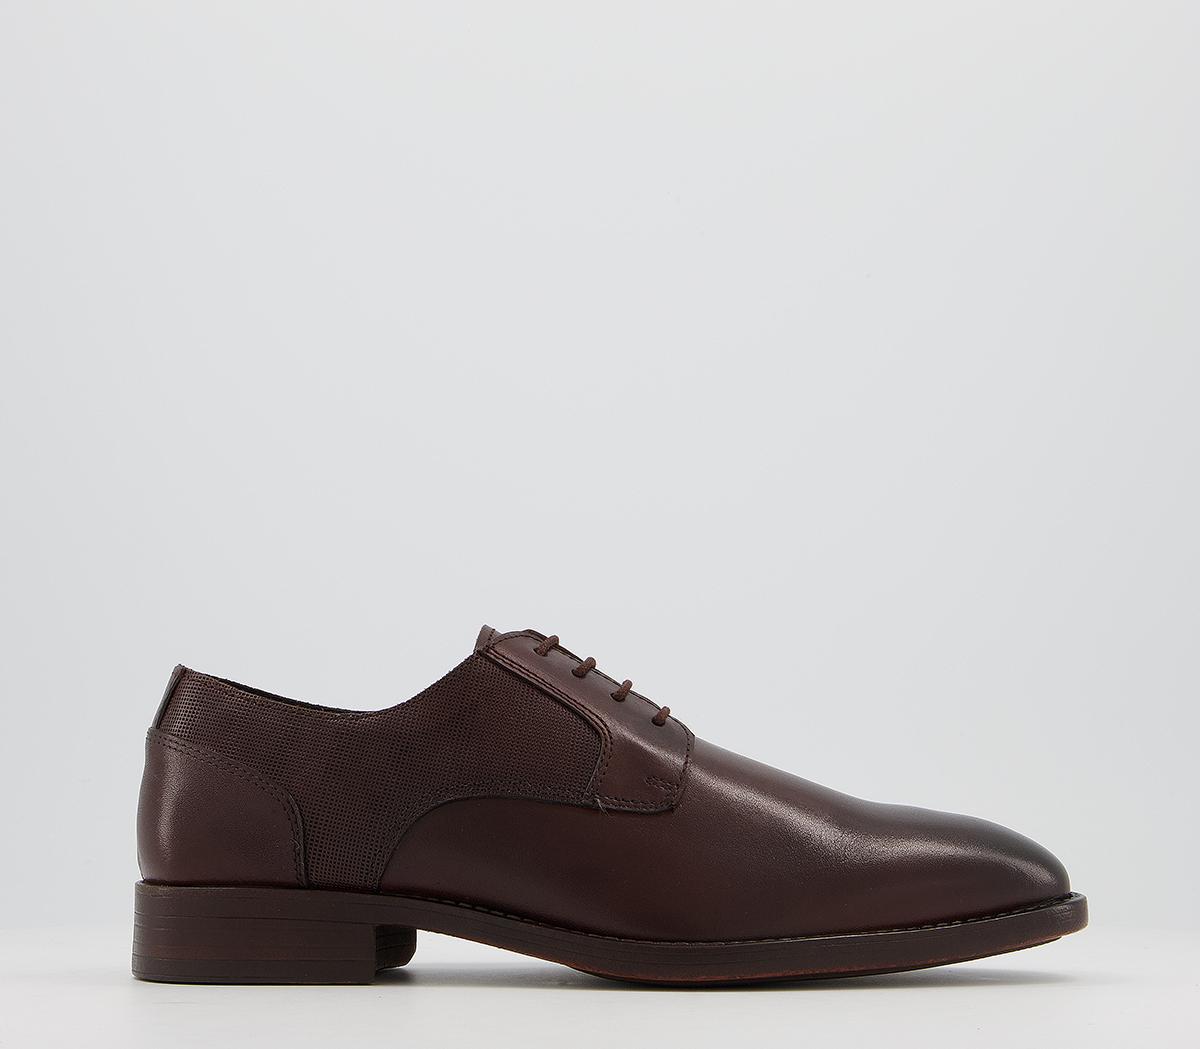 OFFICEMarlon Derby ShoesBrown Leather